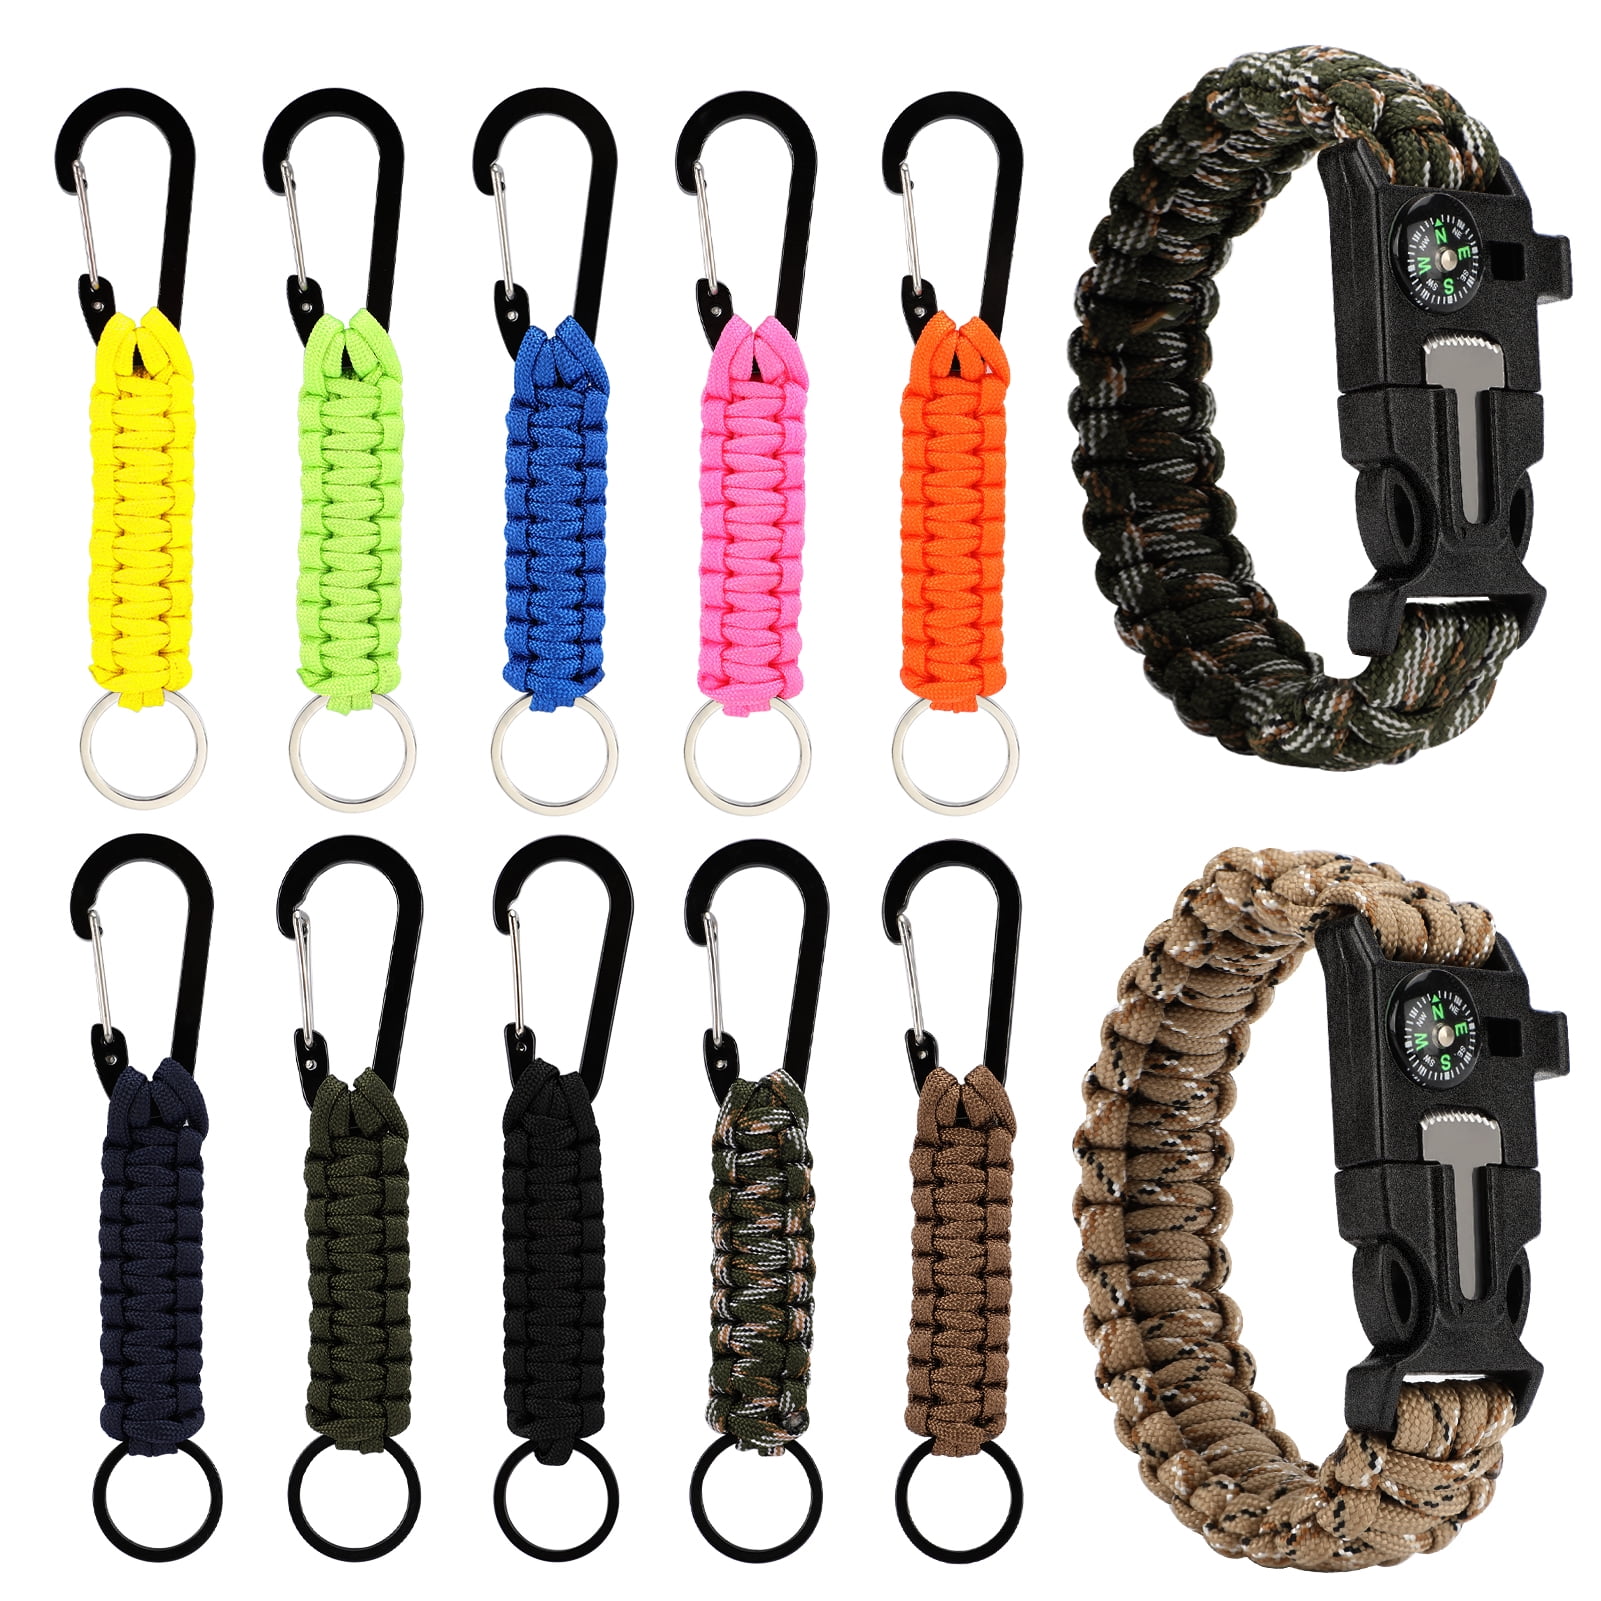 15 in 1 Multi-Function Keychain,Carabiner,Wrench Hunting Ubrand Camping Emergency Fire Starters Screwdriver Pocket Tool for Hiking Bottle Opener Backpacking,Outdoor Survival Kits 